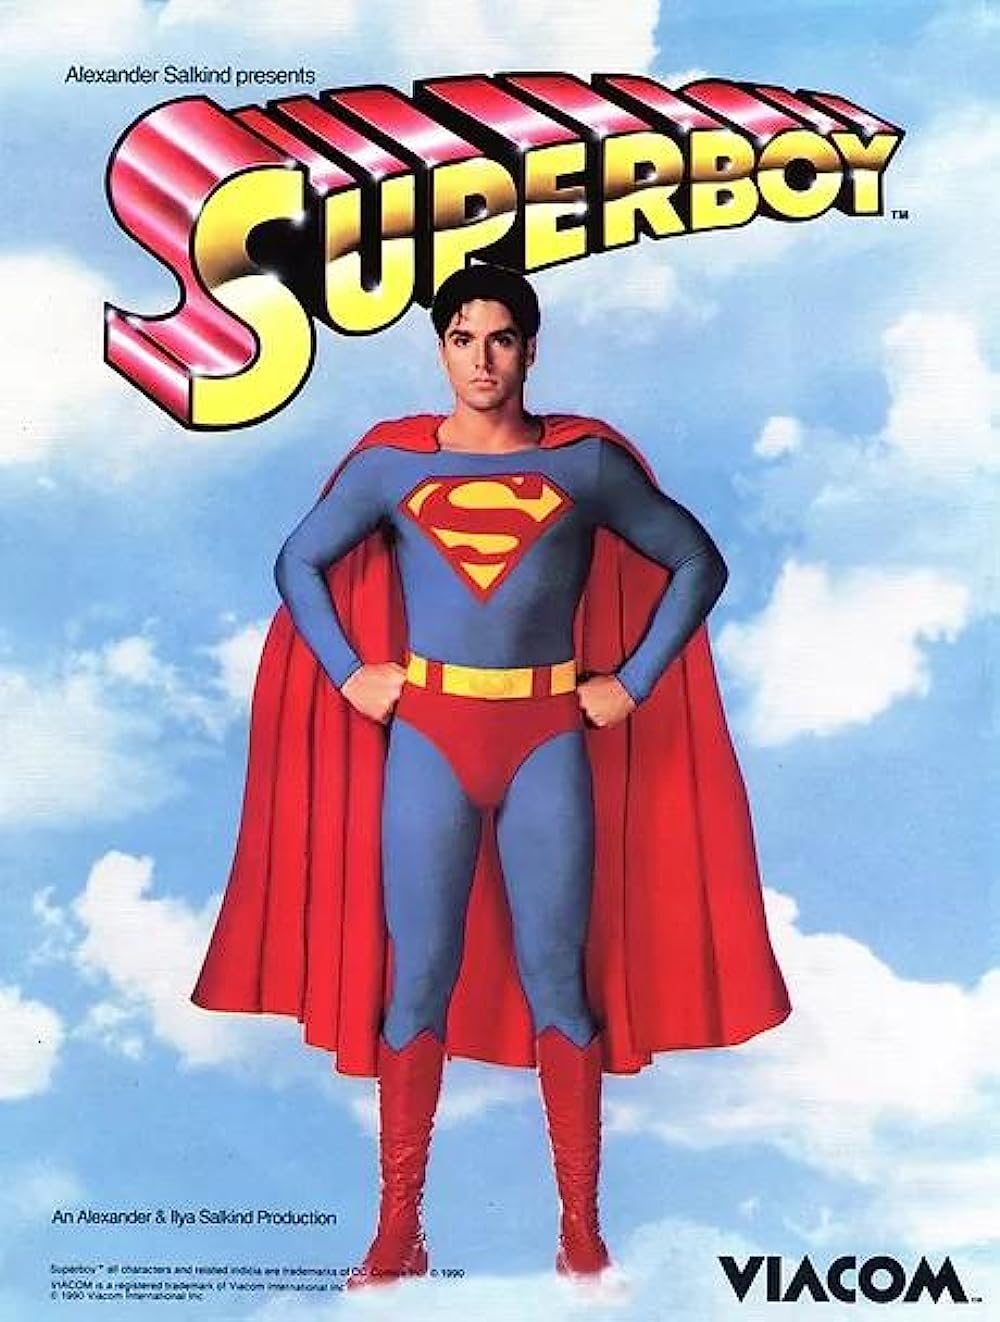 90s Superboy: Exploring the Young Superman